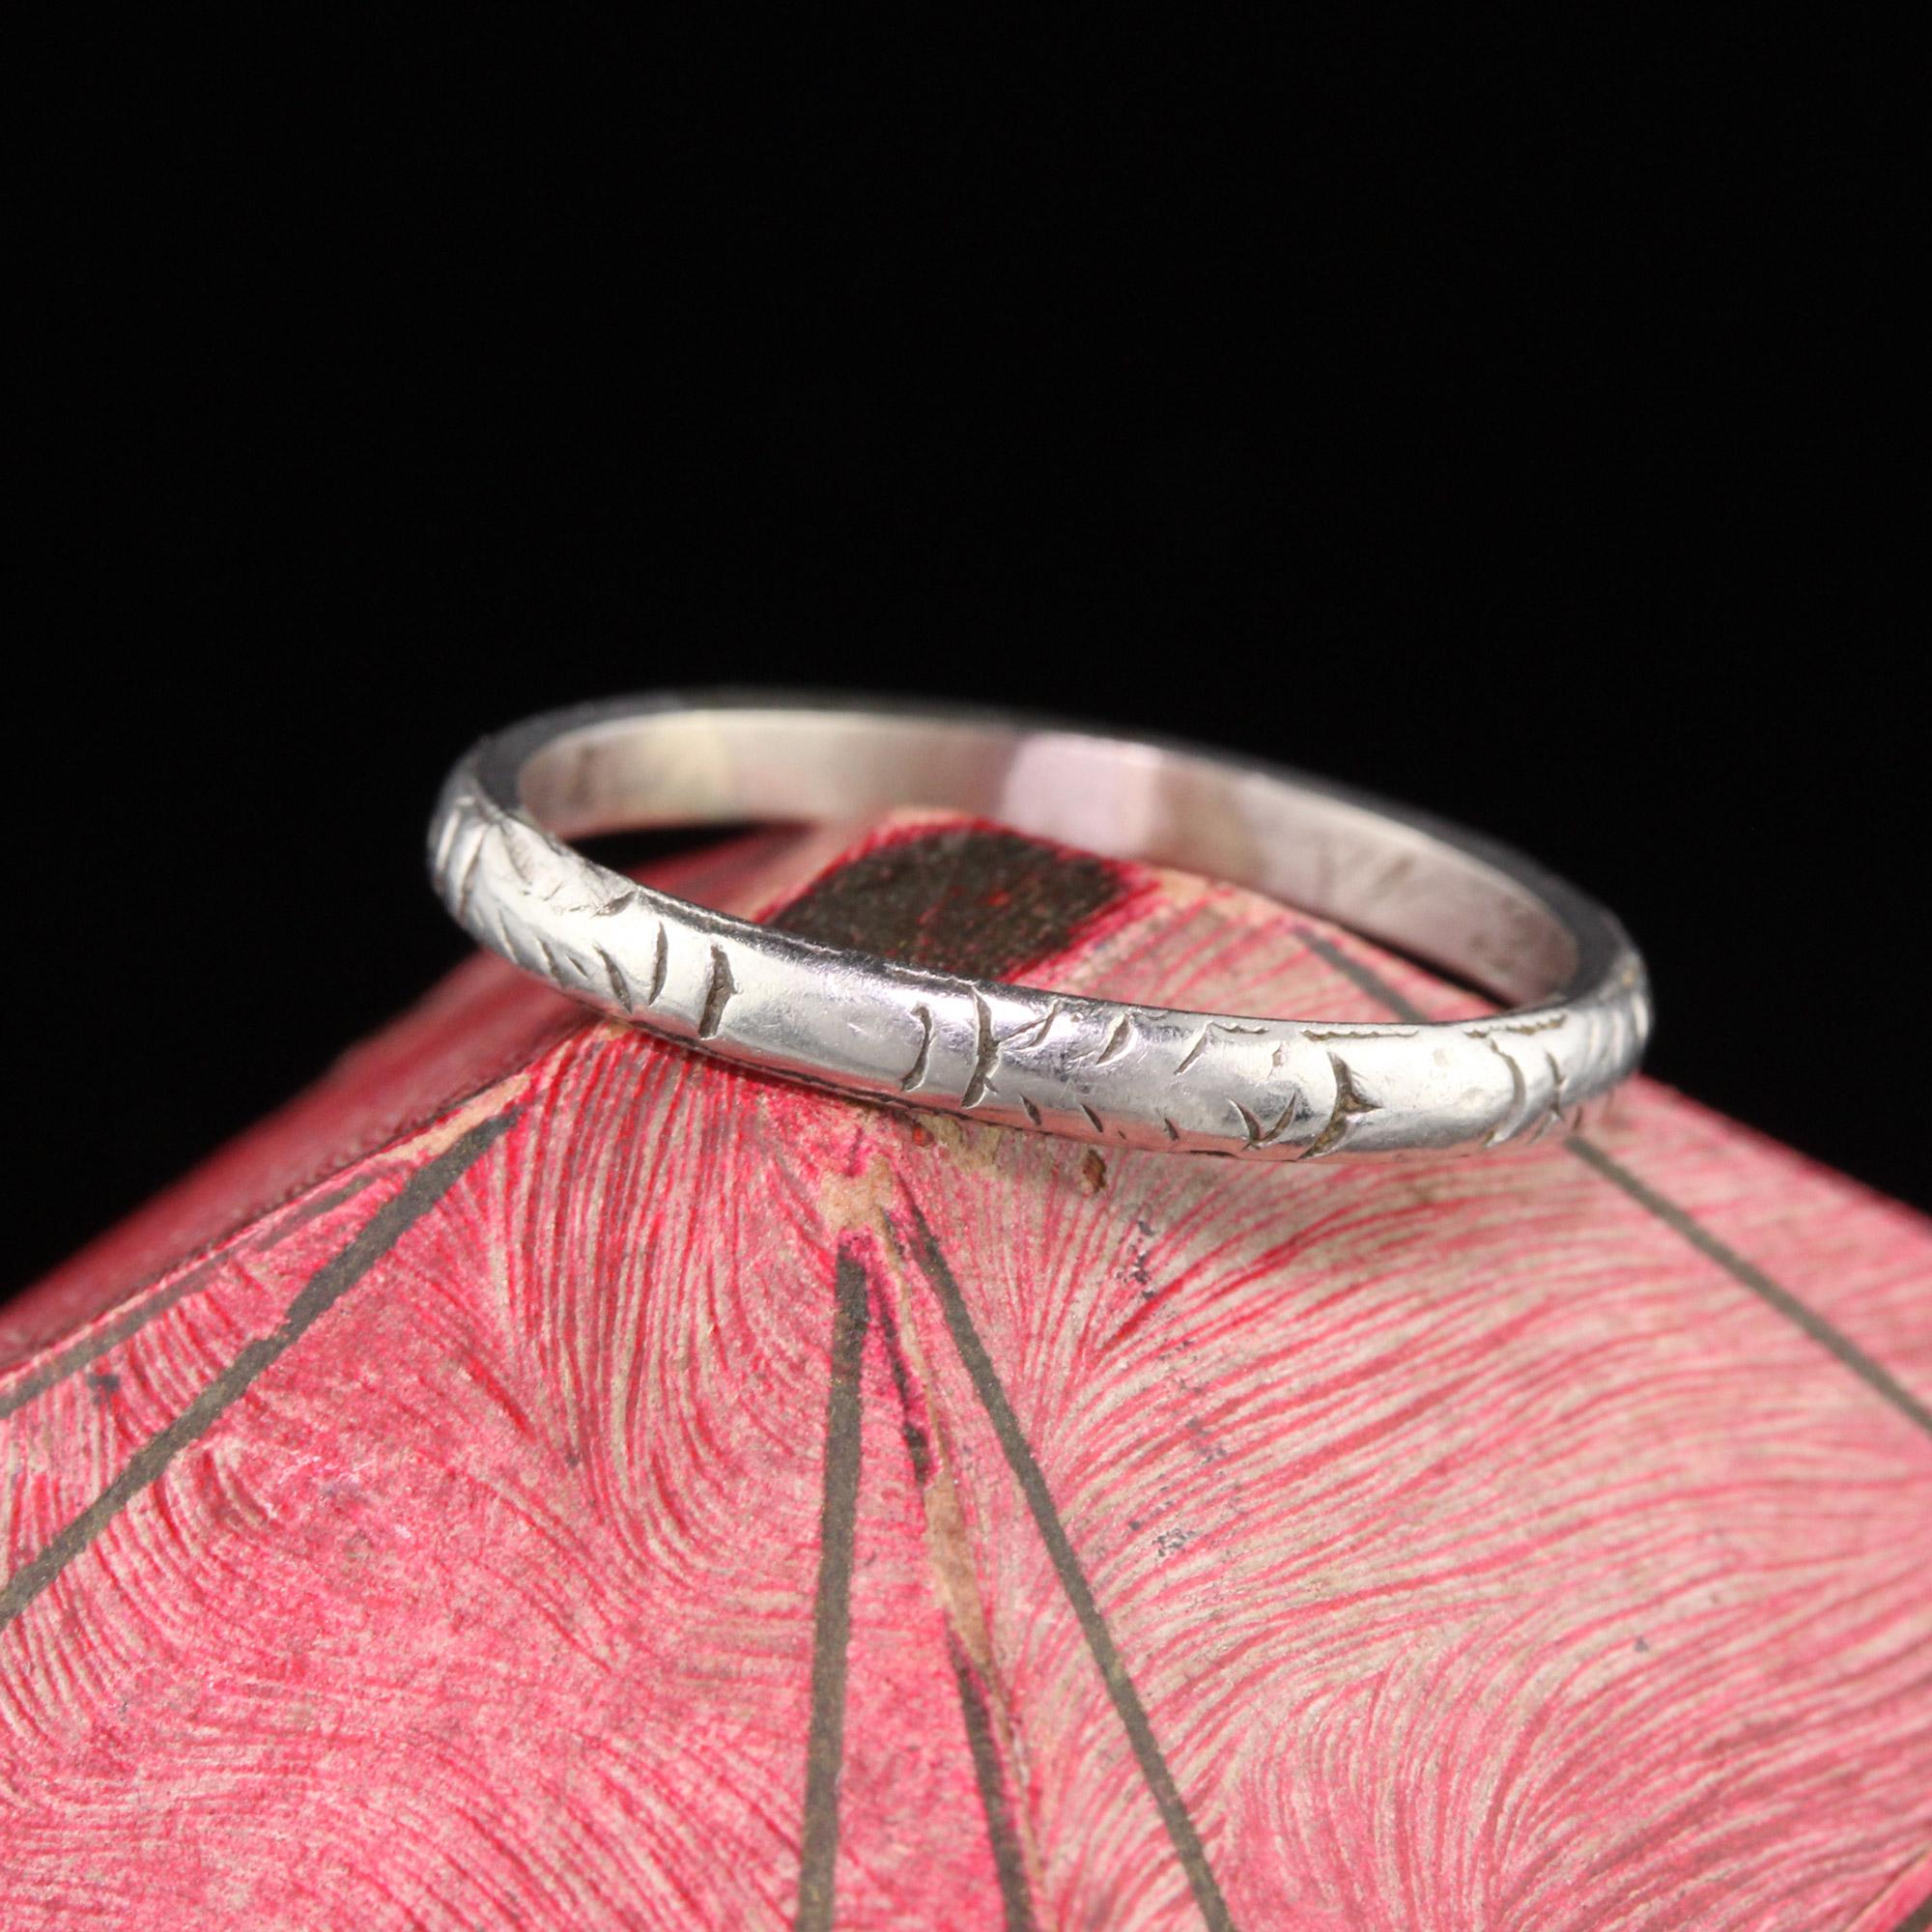 Unisex Art Deco Platinum Engraved Wedding Band with the engravings going all the way around. 

#R0229

Metal: Platinum

Weight: 3.1 Grams

Ring Size: 9

*Unfortunately this ring cannot be sized

Measurements: 2.36 mm wide

Measurement from finger to